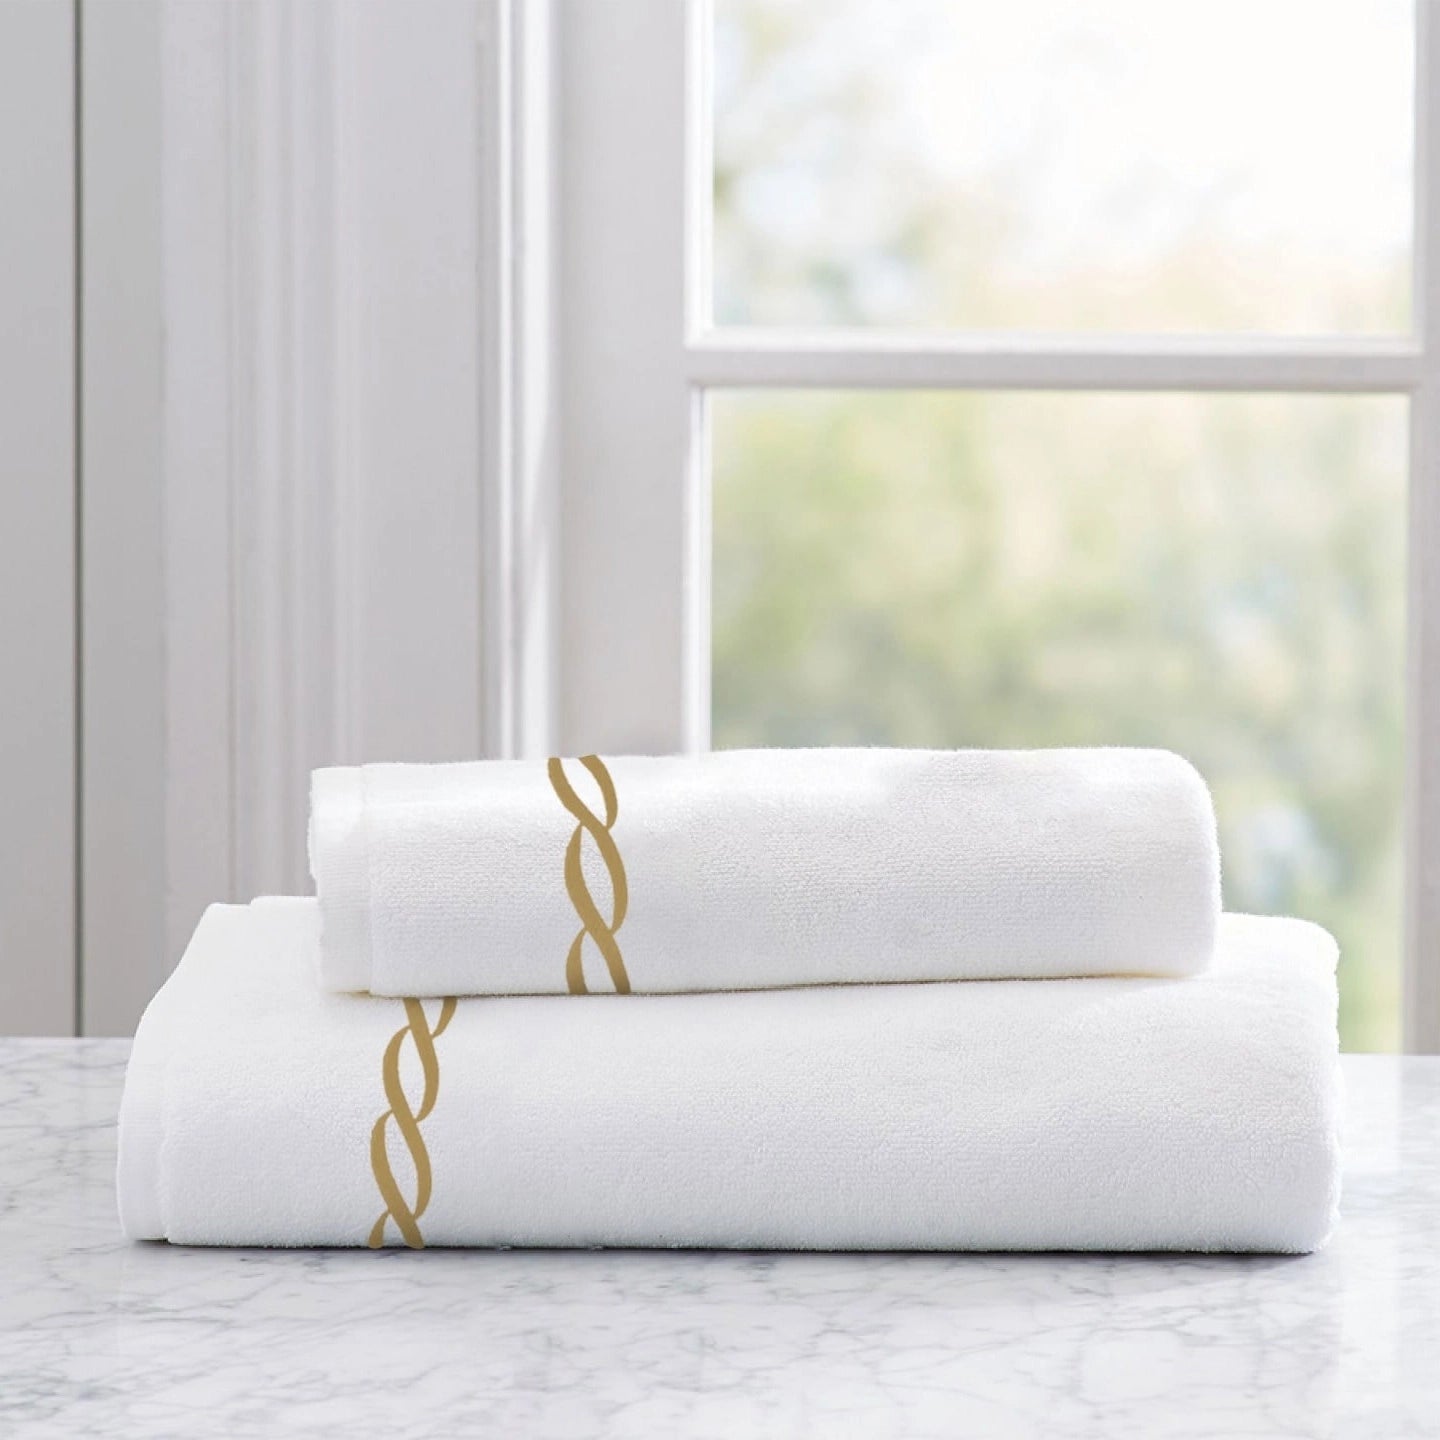 Chain White Embroidered Towel